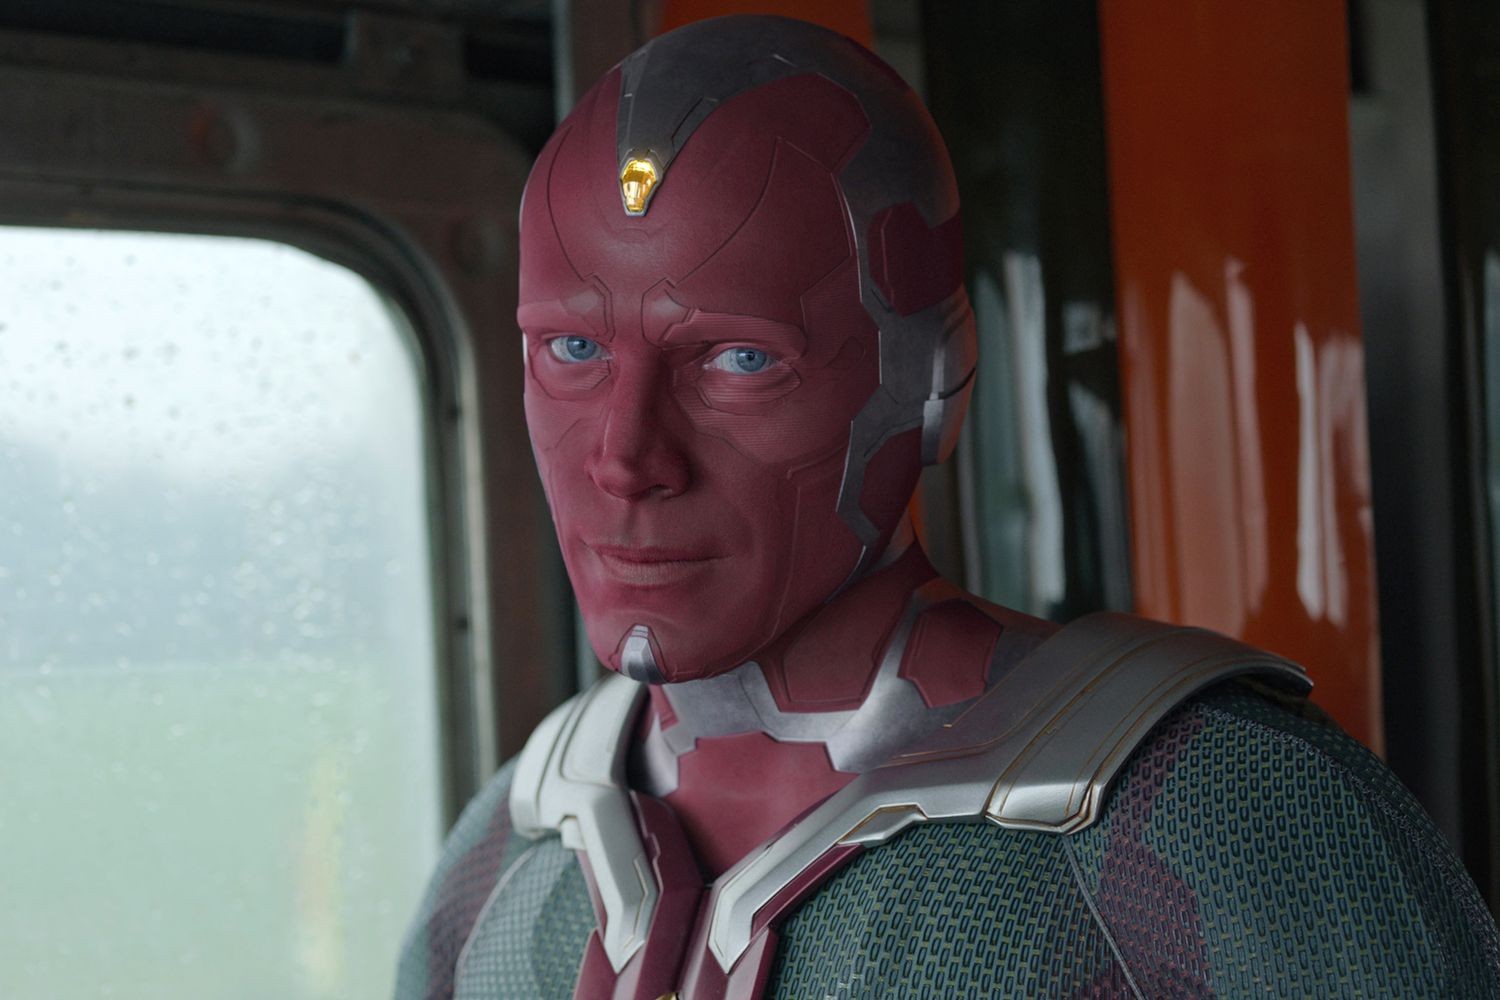 Paul Bettany plays Vision in the MCU